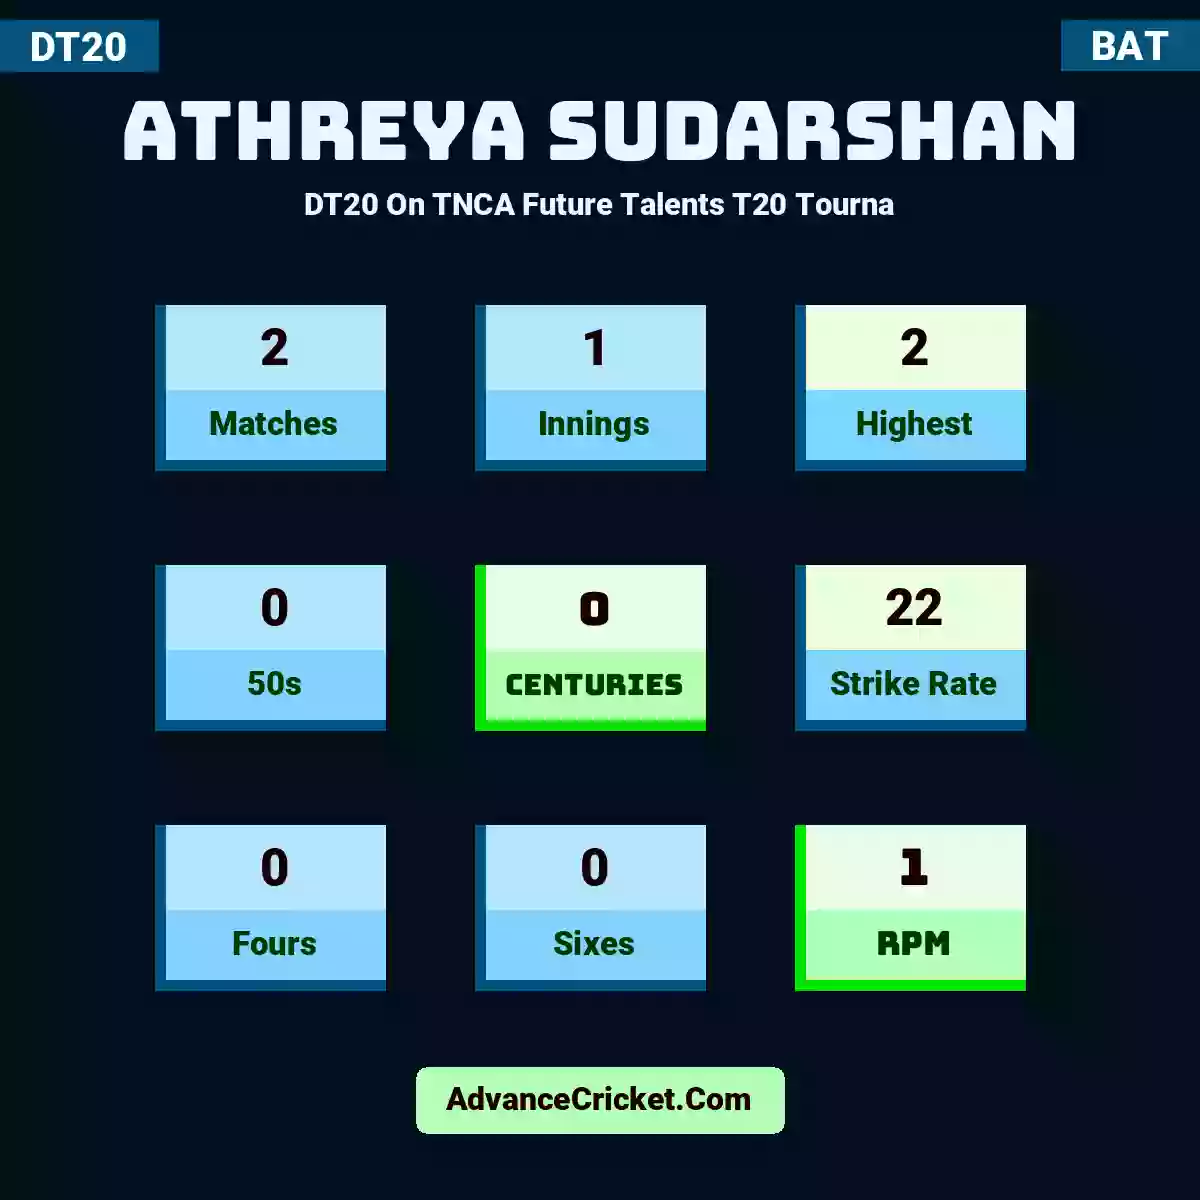 Athreya Sudarshan DT20  On TNCA Future Talents T20 Tourna, Athreya Sudarshan played 2 matches, scored 2 runs as highest, 0 half-centuries, and 0 centuries, with a strike rate of 22. A.Sudarshan hit 0 fours and 0 sixes, with an RPM of 1.